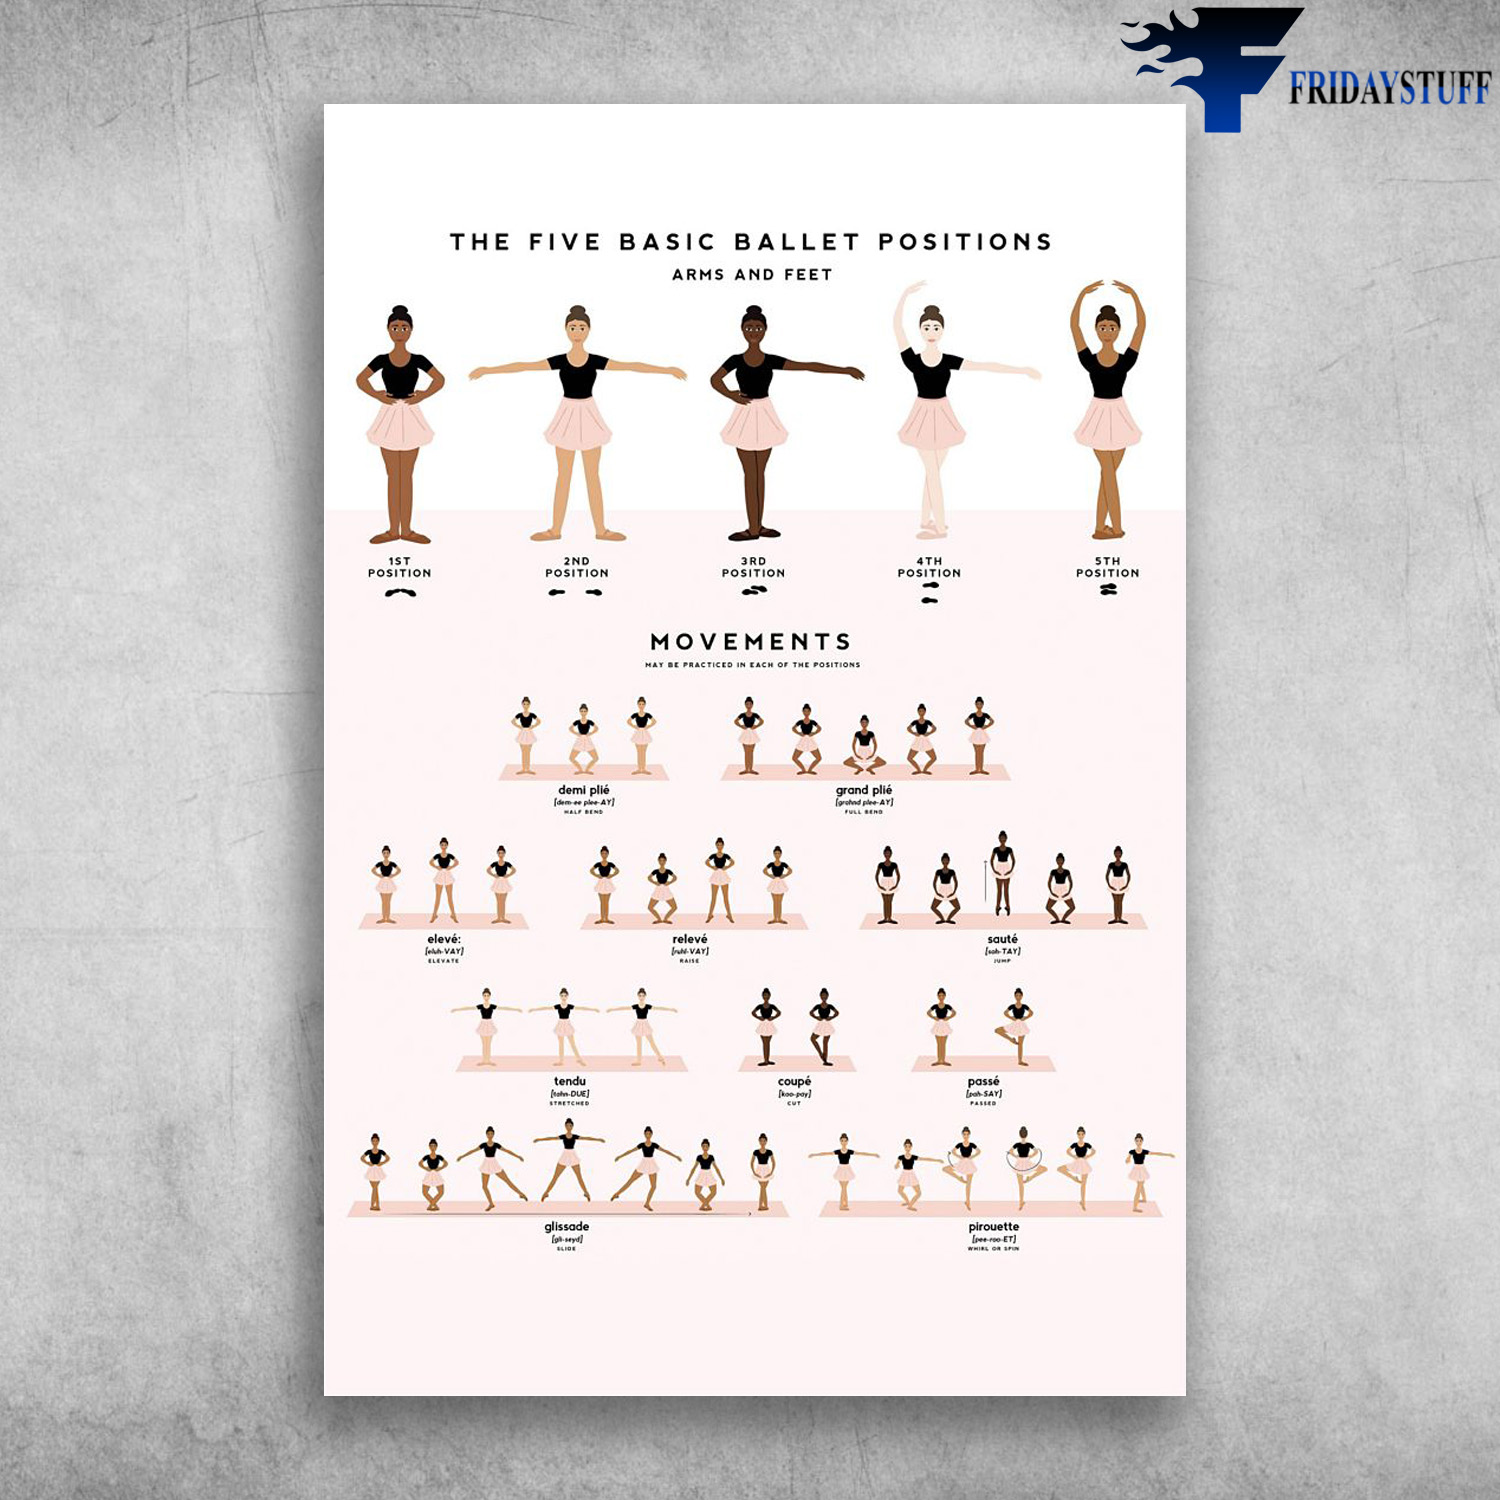 Ballet Dancer Skill The Five Basic Ballet Positions Arms And Feet Fridaystuff